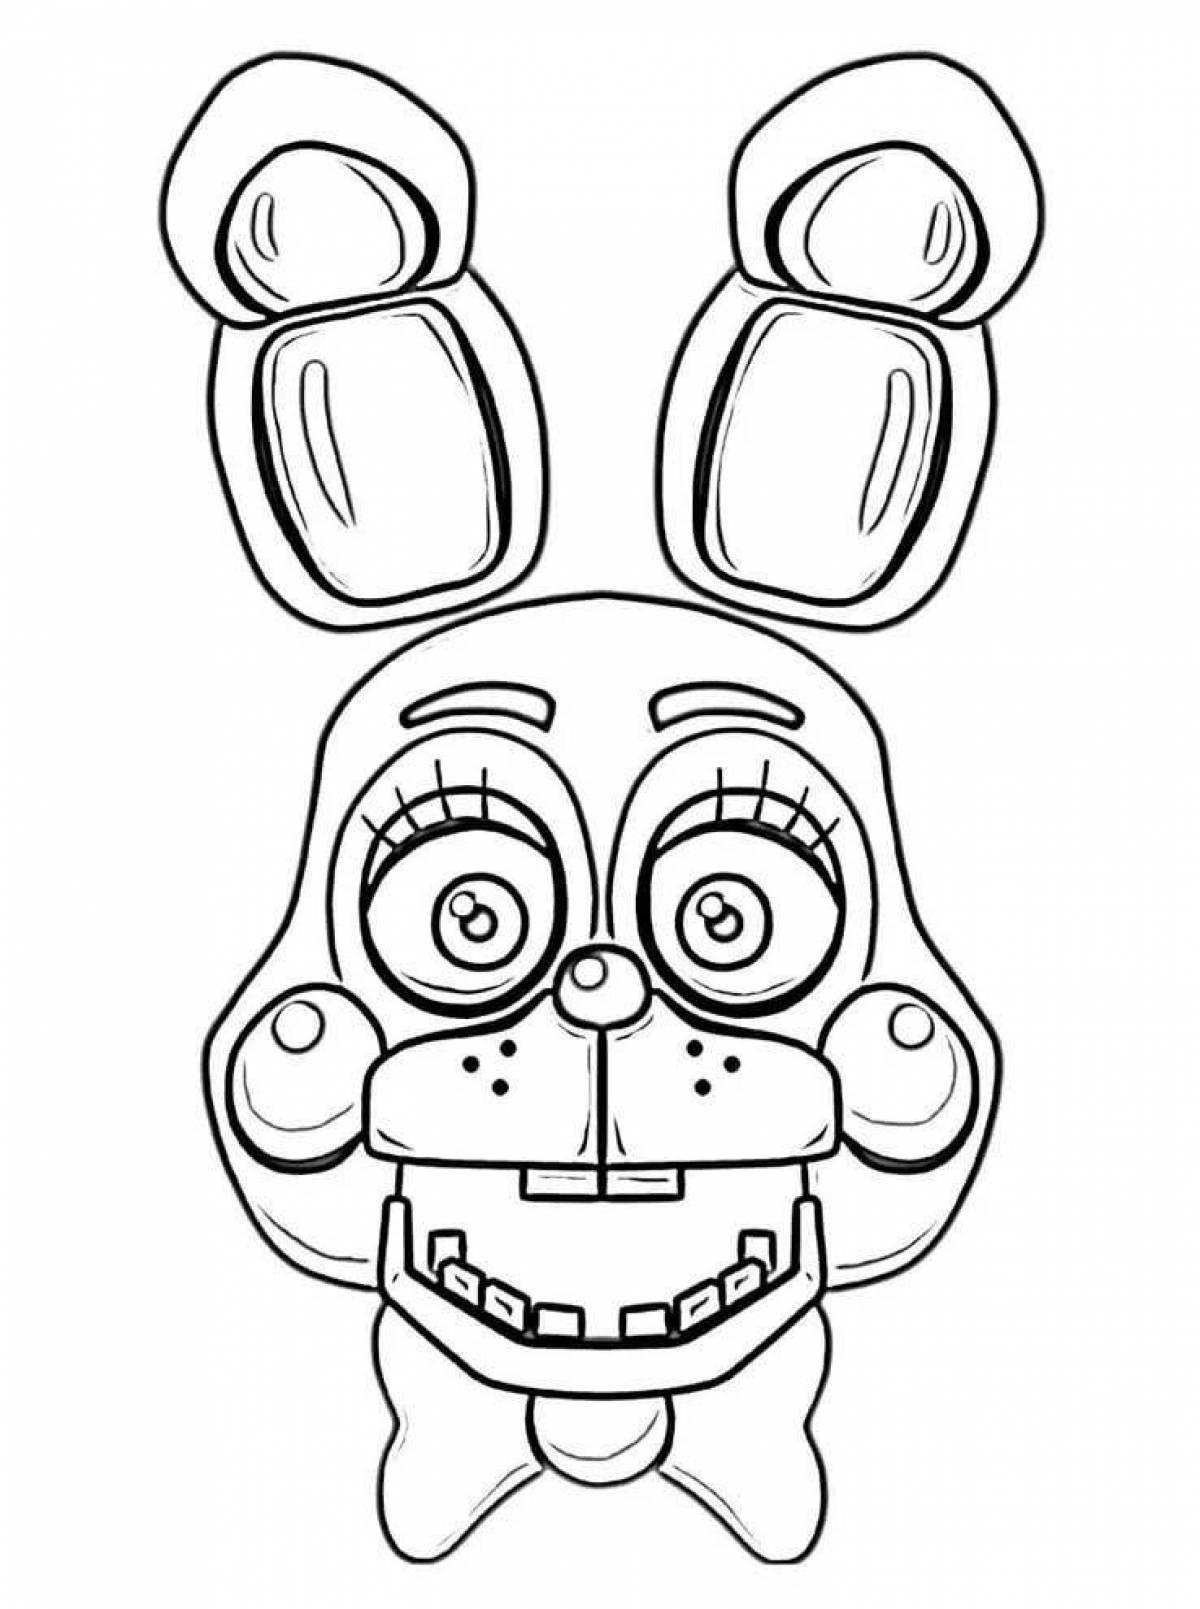 Colorful coloring of animatronic bonnie